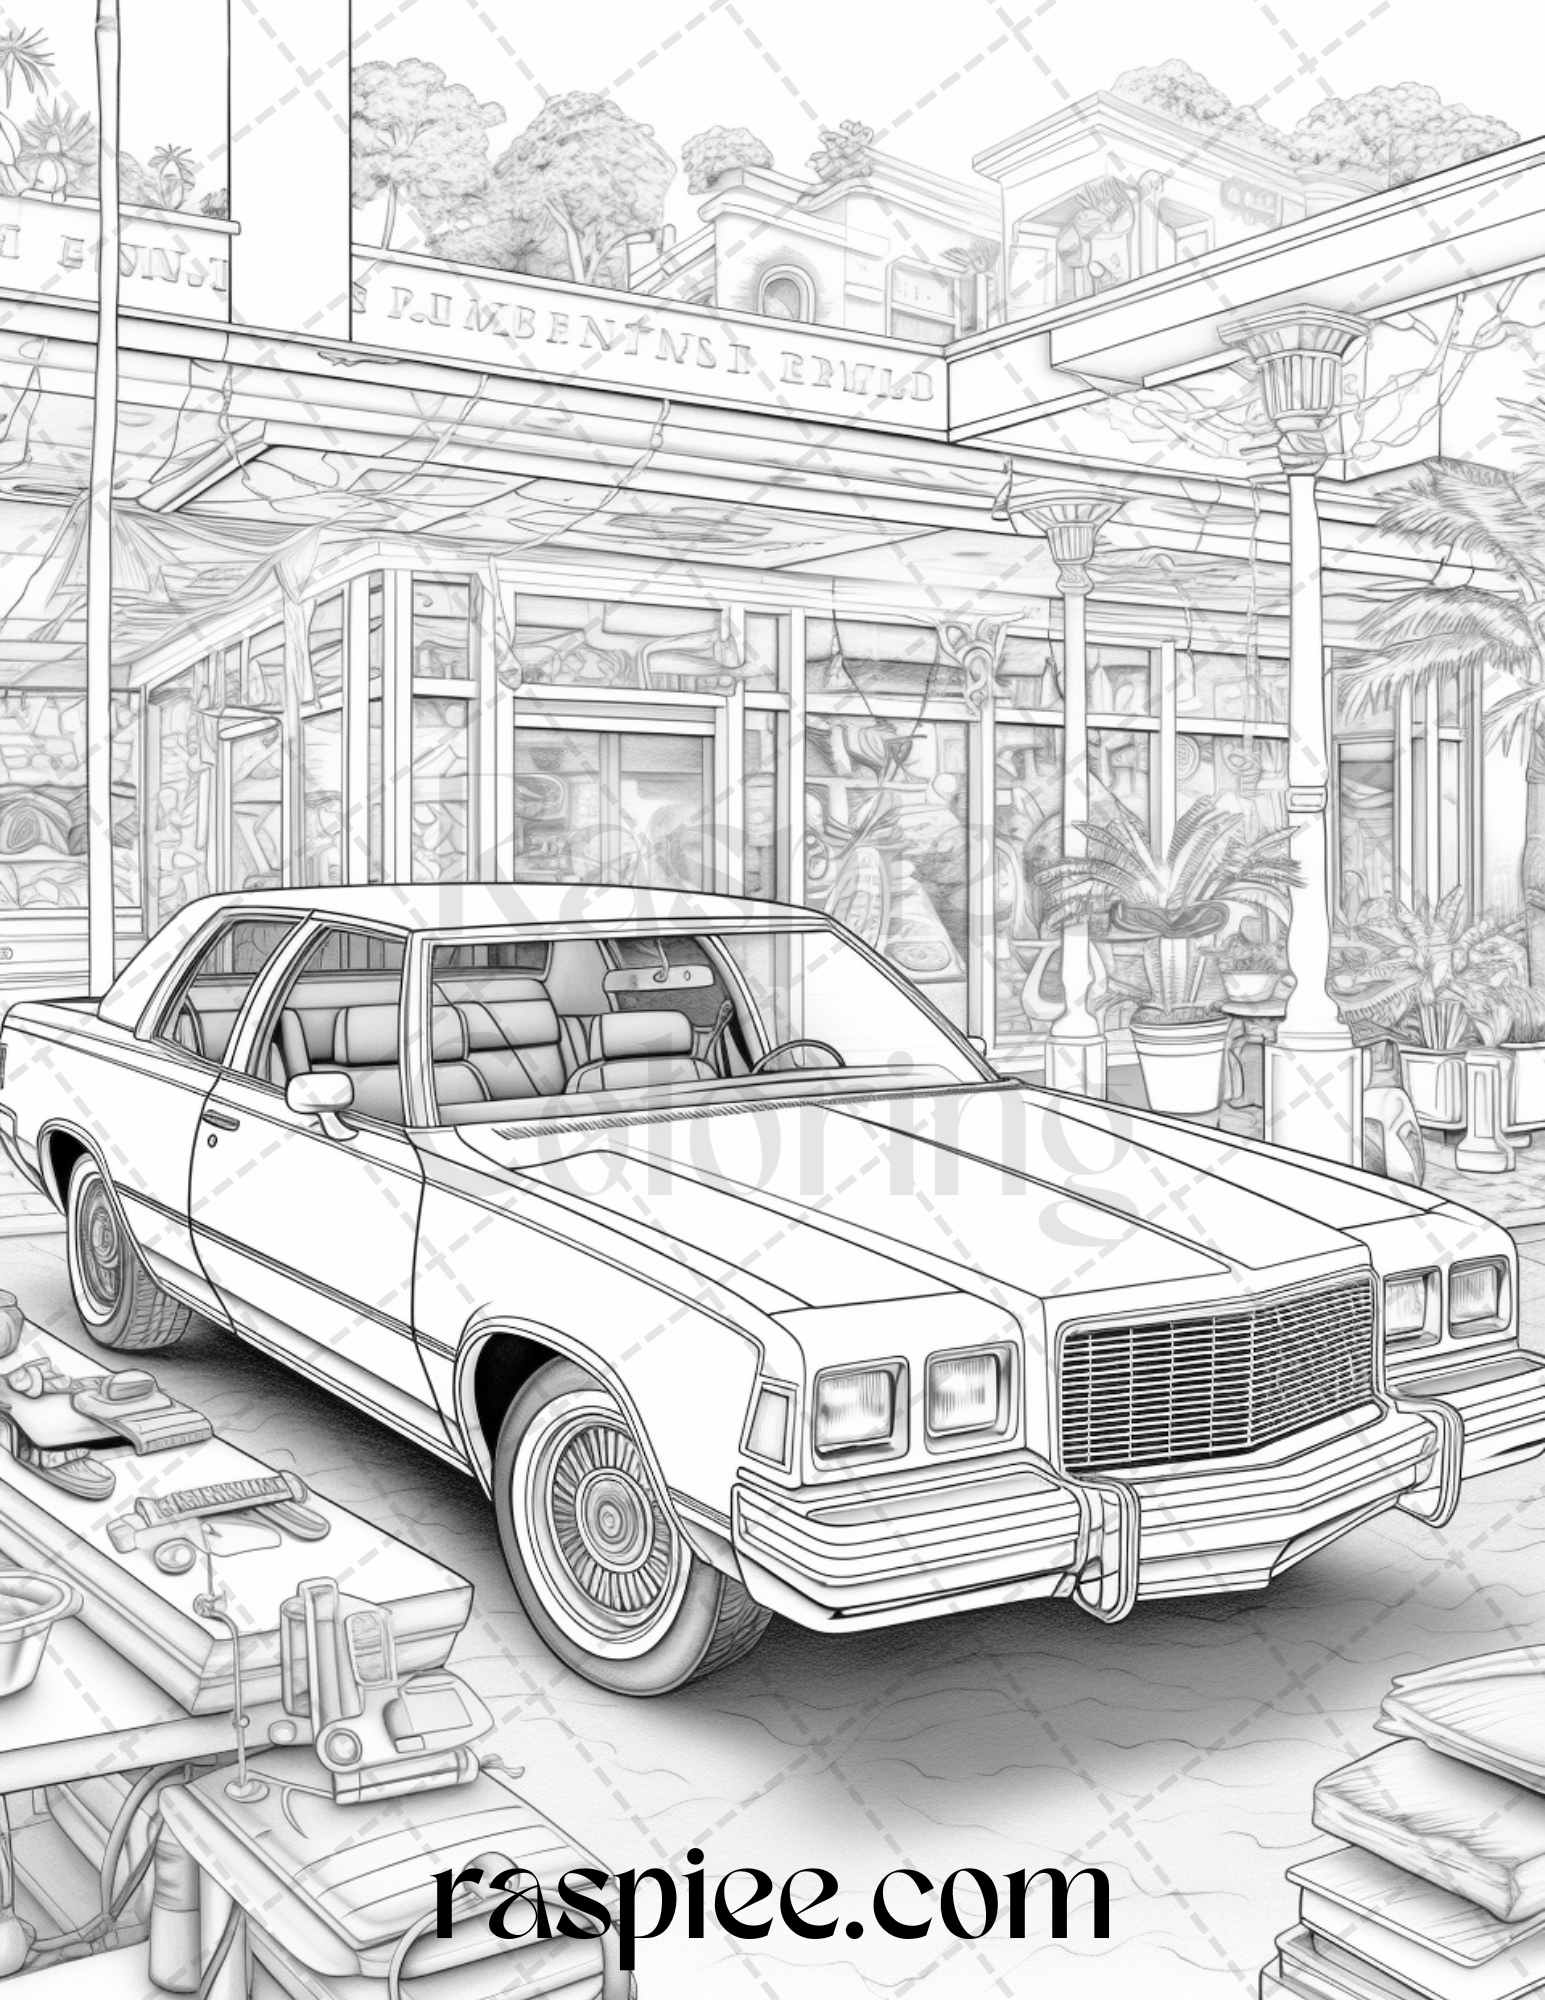 42 Vintage Cars Grayscale Coloring Pages Printable for Adults, PDF File Instant Download - raspiee